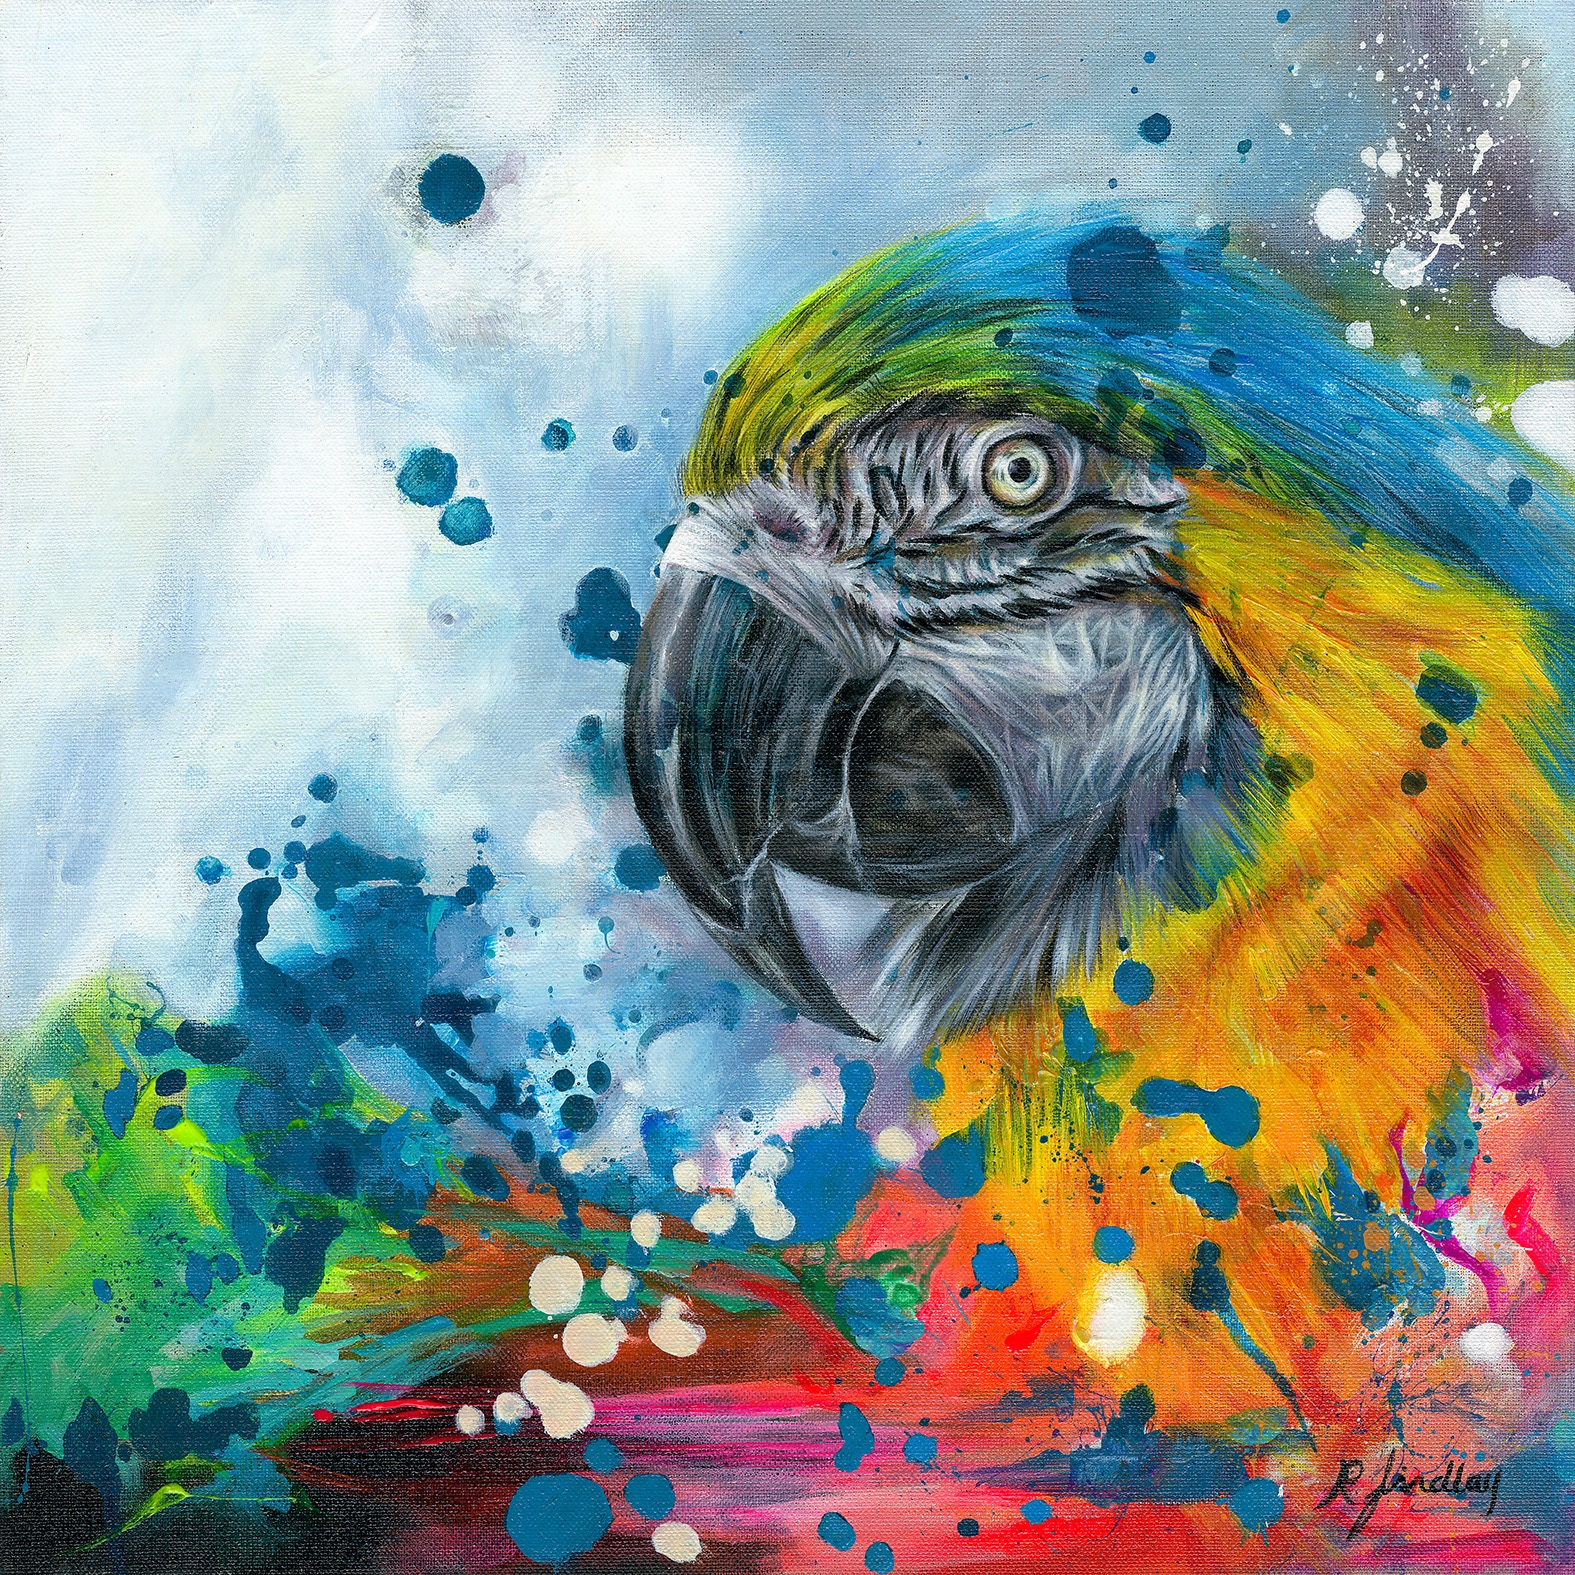 This is a colourful painting of a blue and yellow Macaw with elements of realism and abstraction.